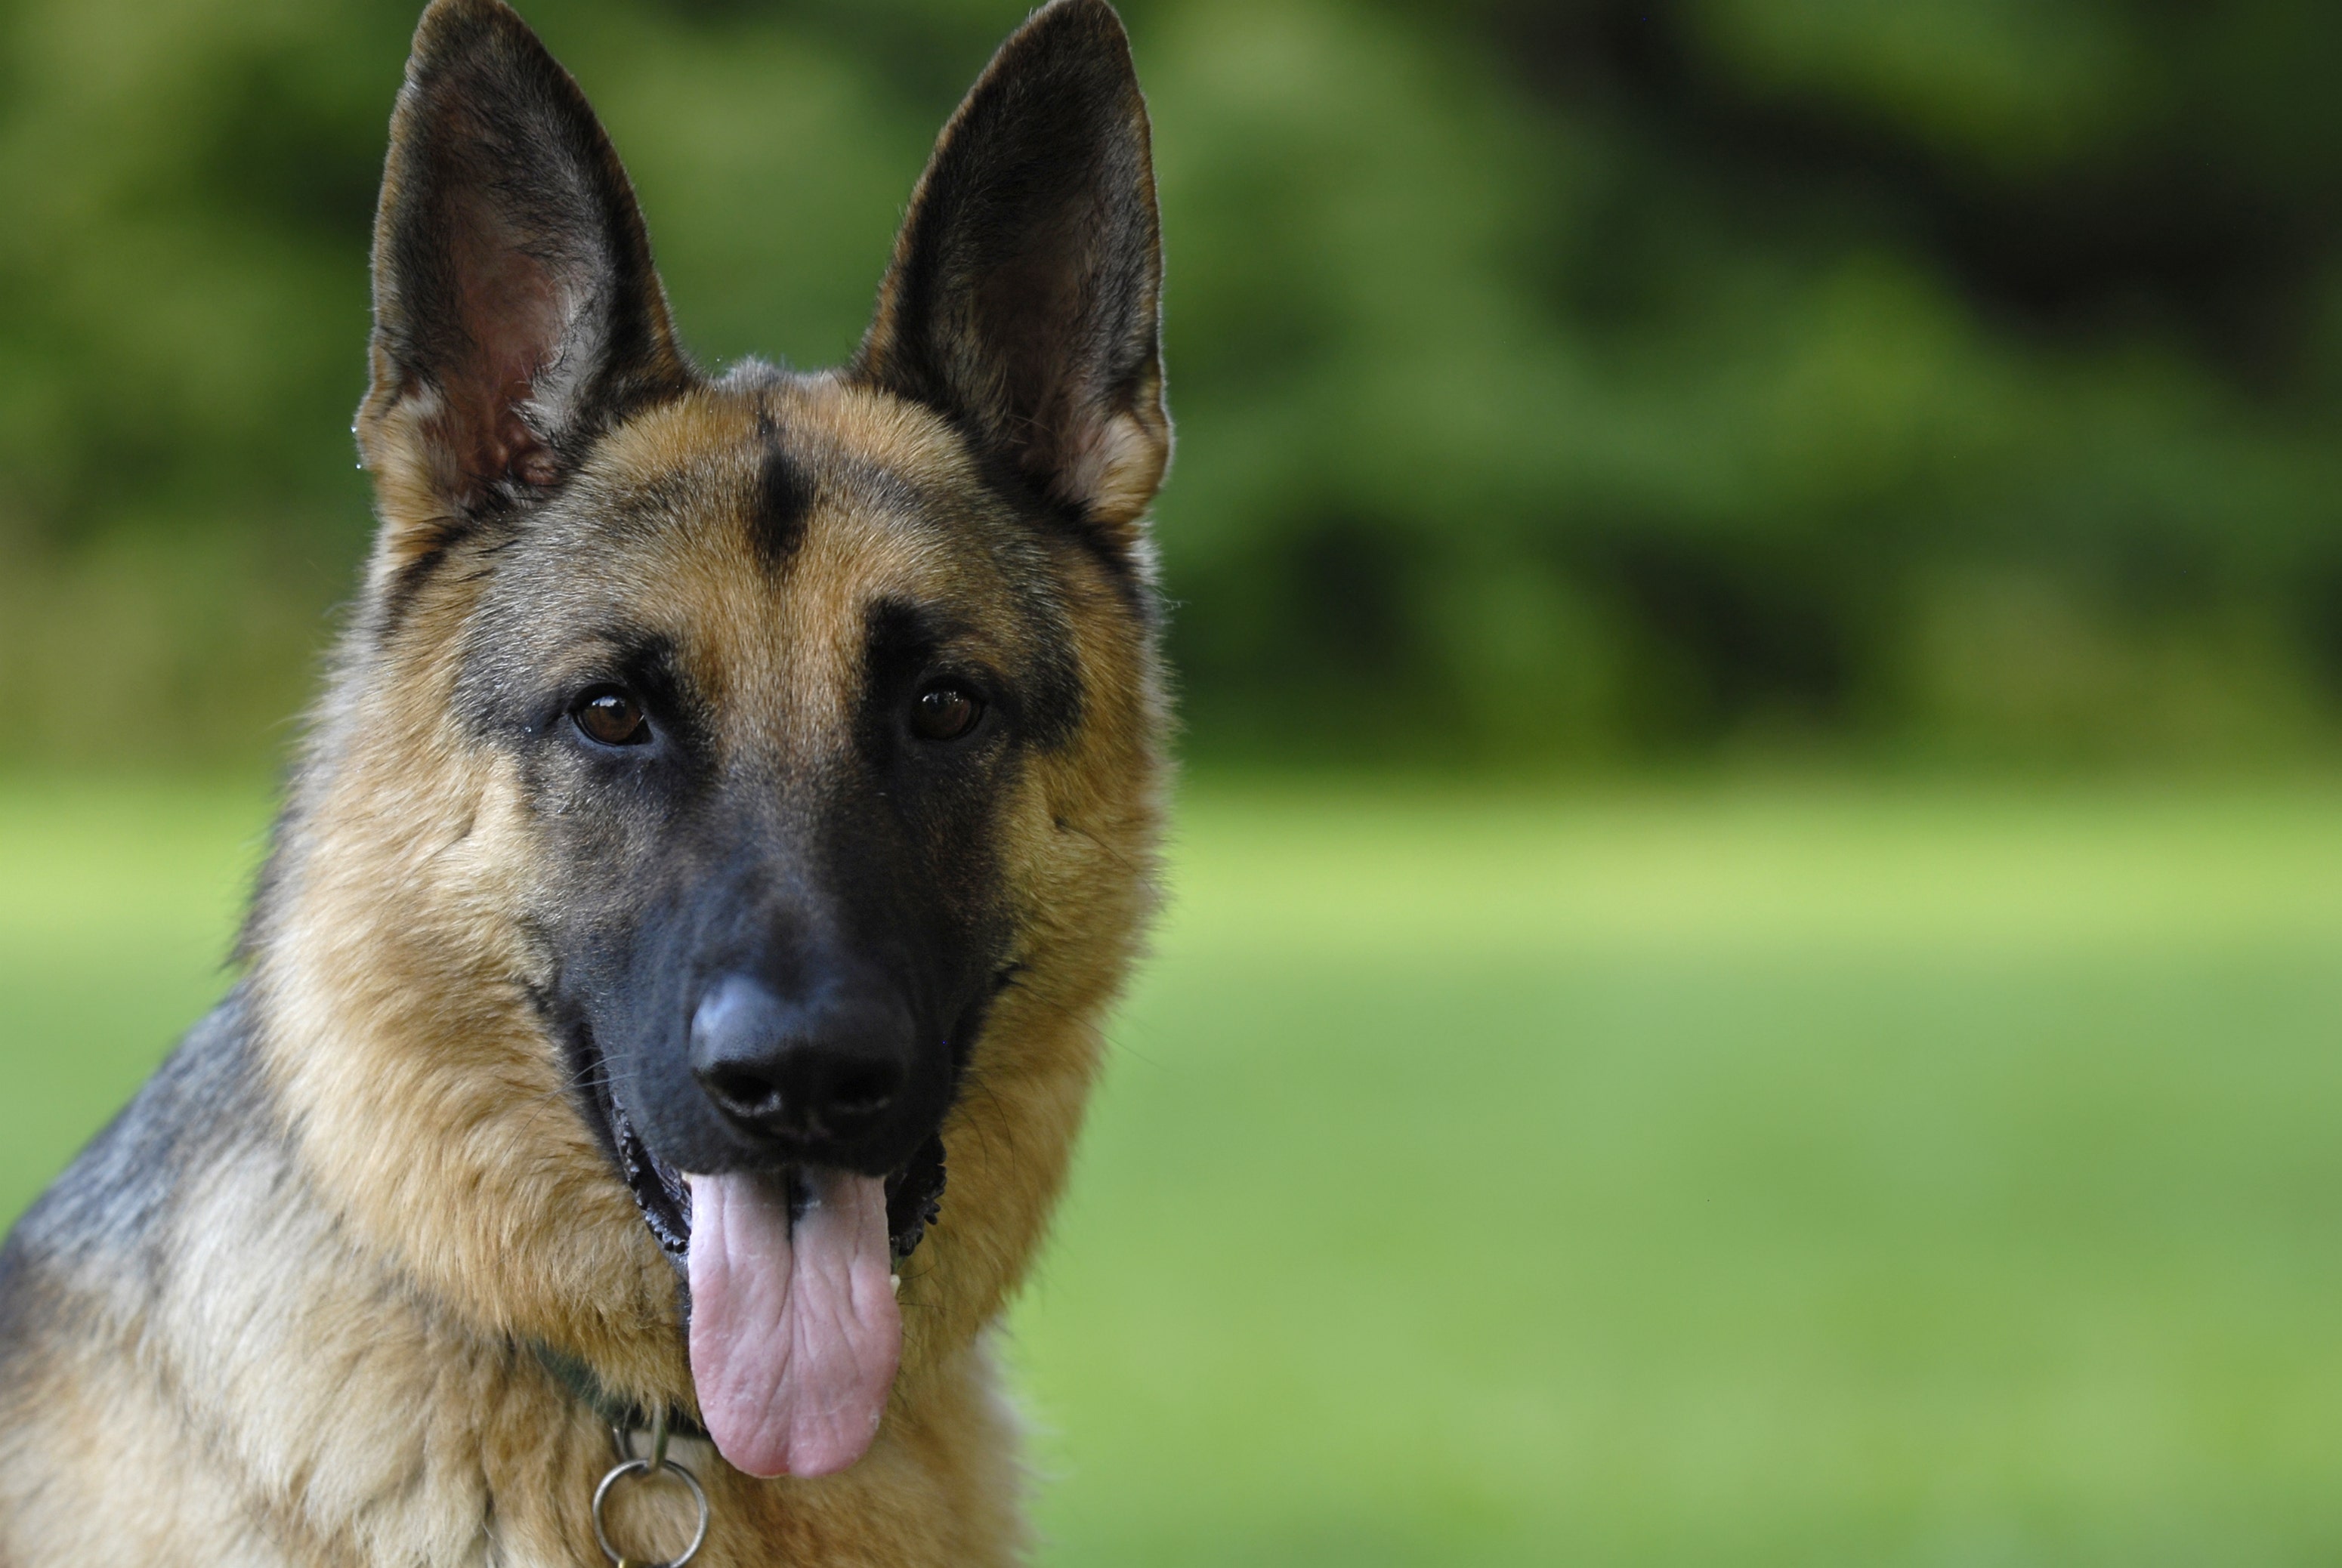 Coronavirus-infected German shepherd, first dog to test positive for  COVID-19 in US, dies | Fox News